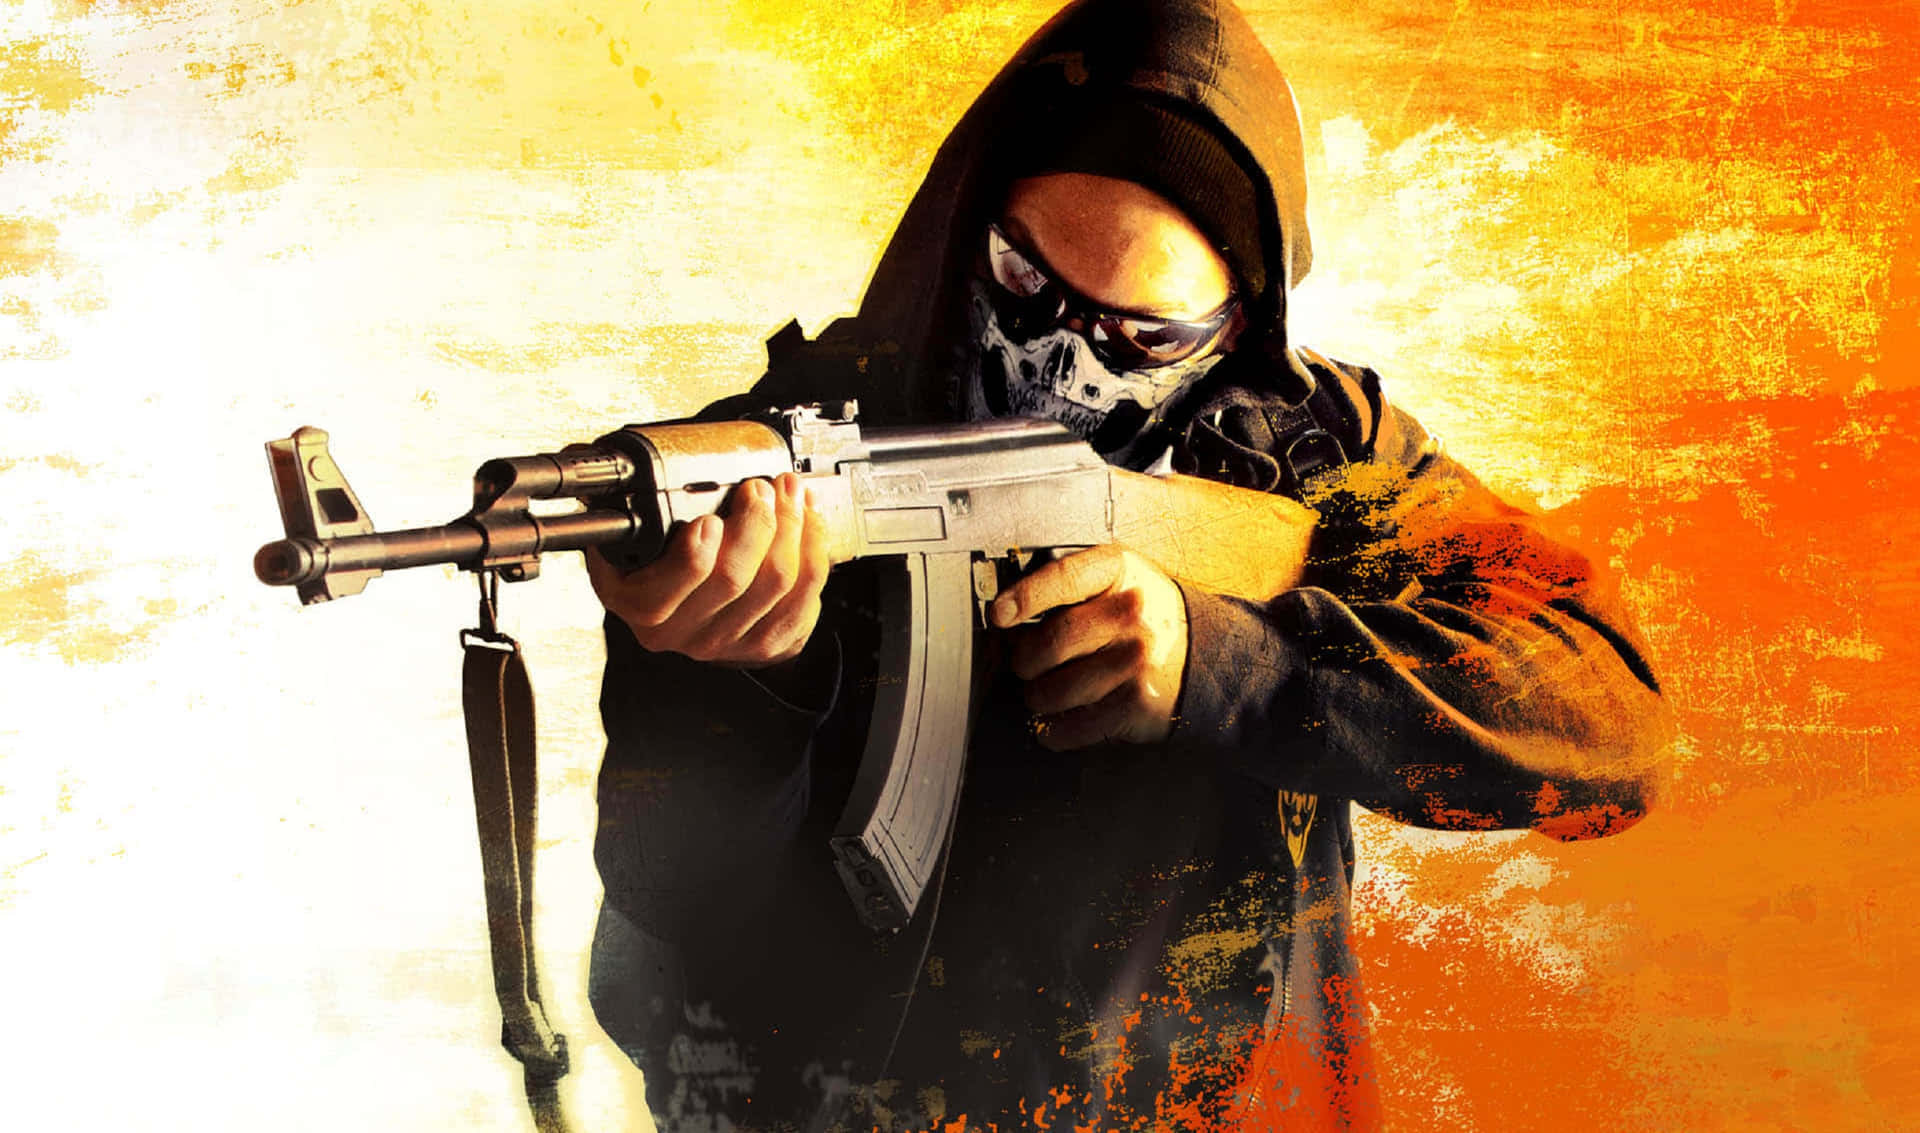 Get Ready for Competitive Gaming with Counter-Strike Global Offensive!